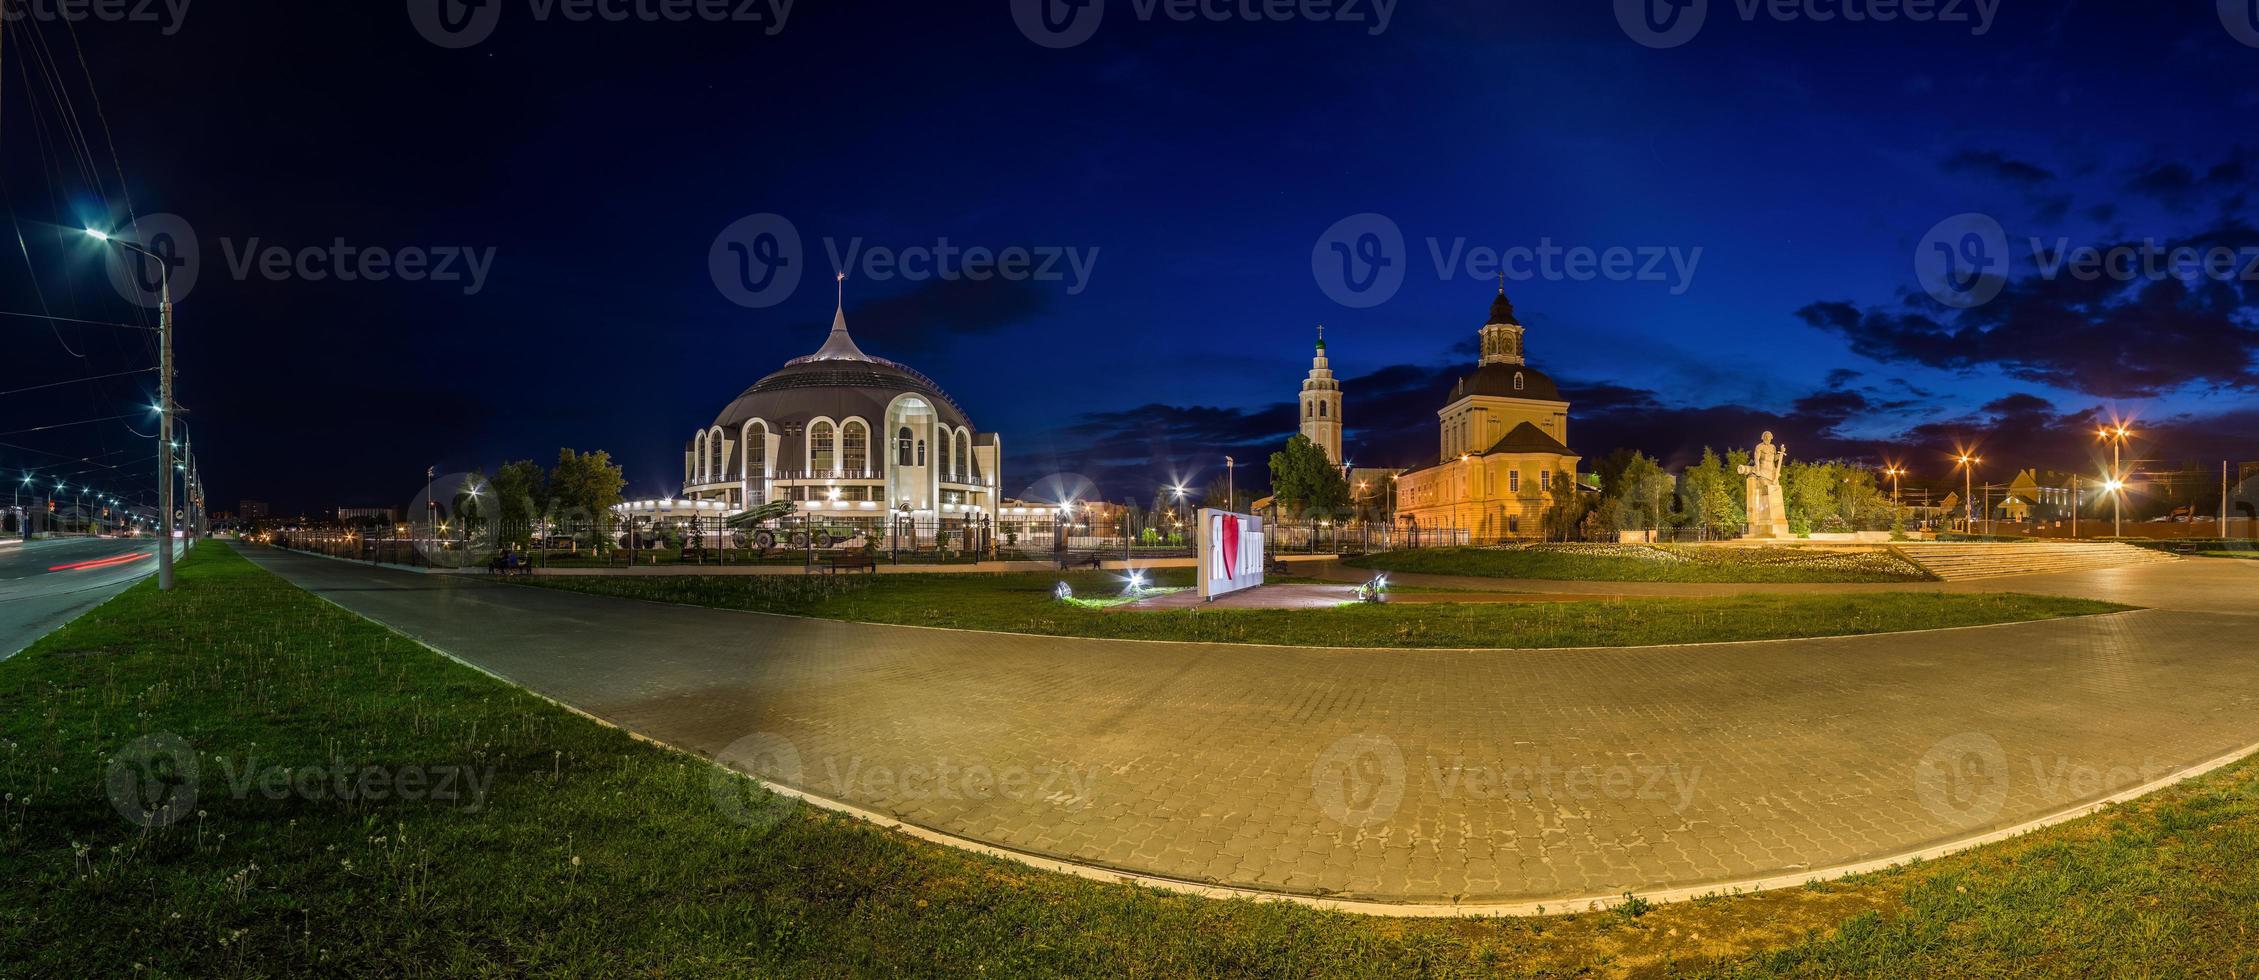 Night Tula wide angle view Arms Museum and Demidov monument and photo